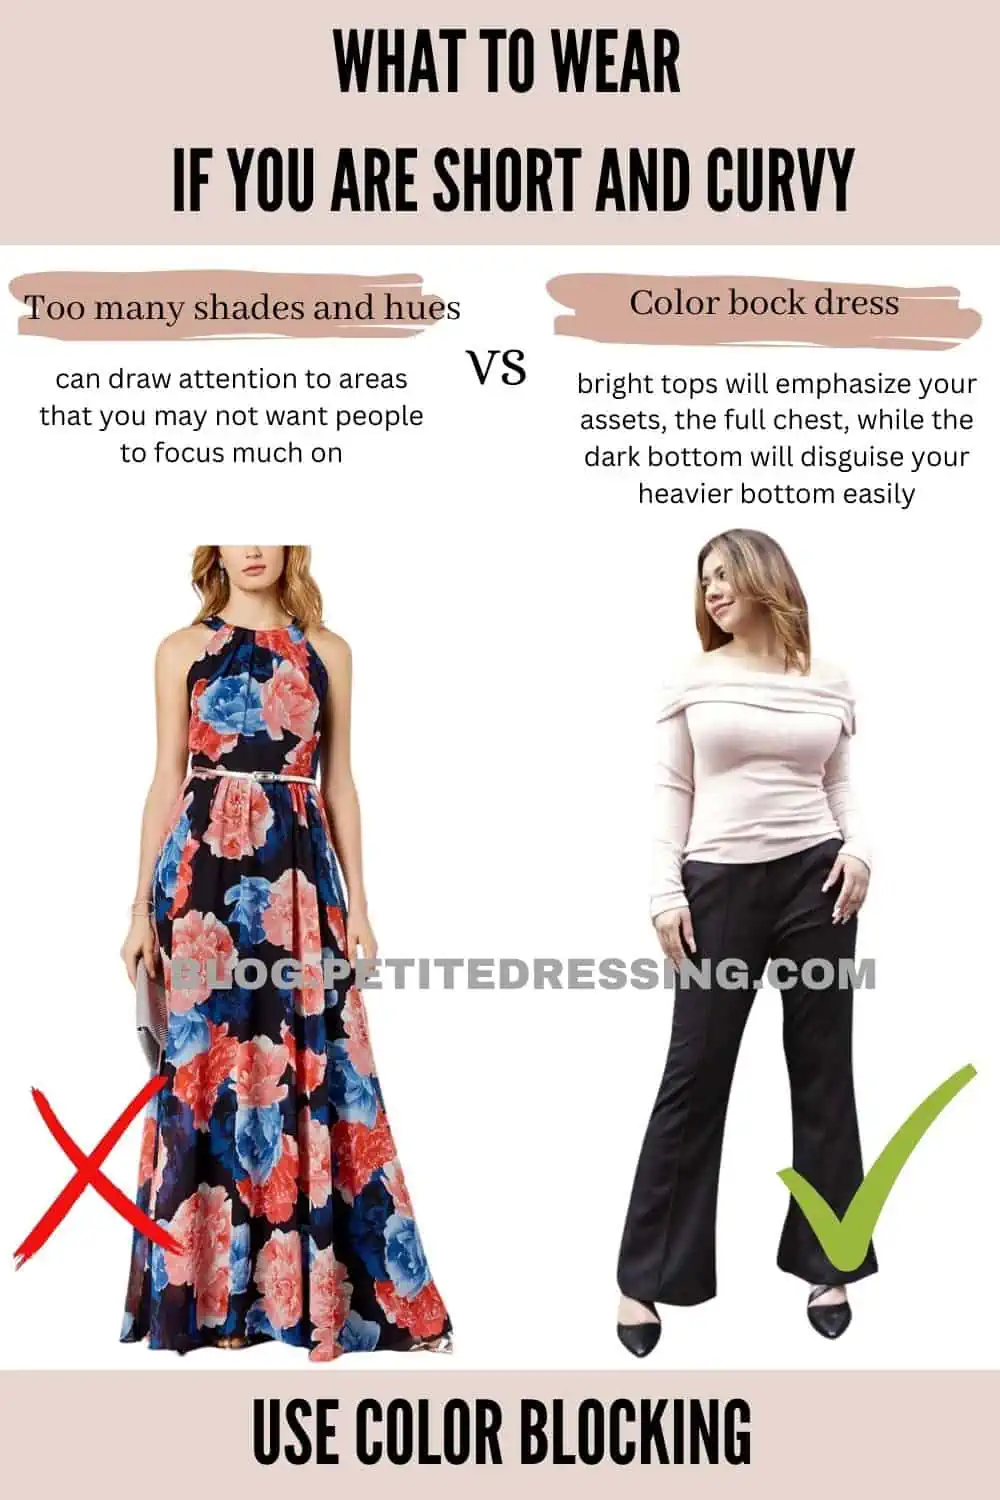 Fashion for Curvy Ladies: How To Accentuate Your Figure